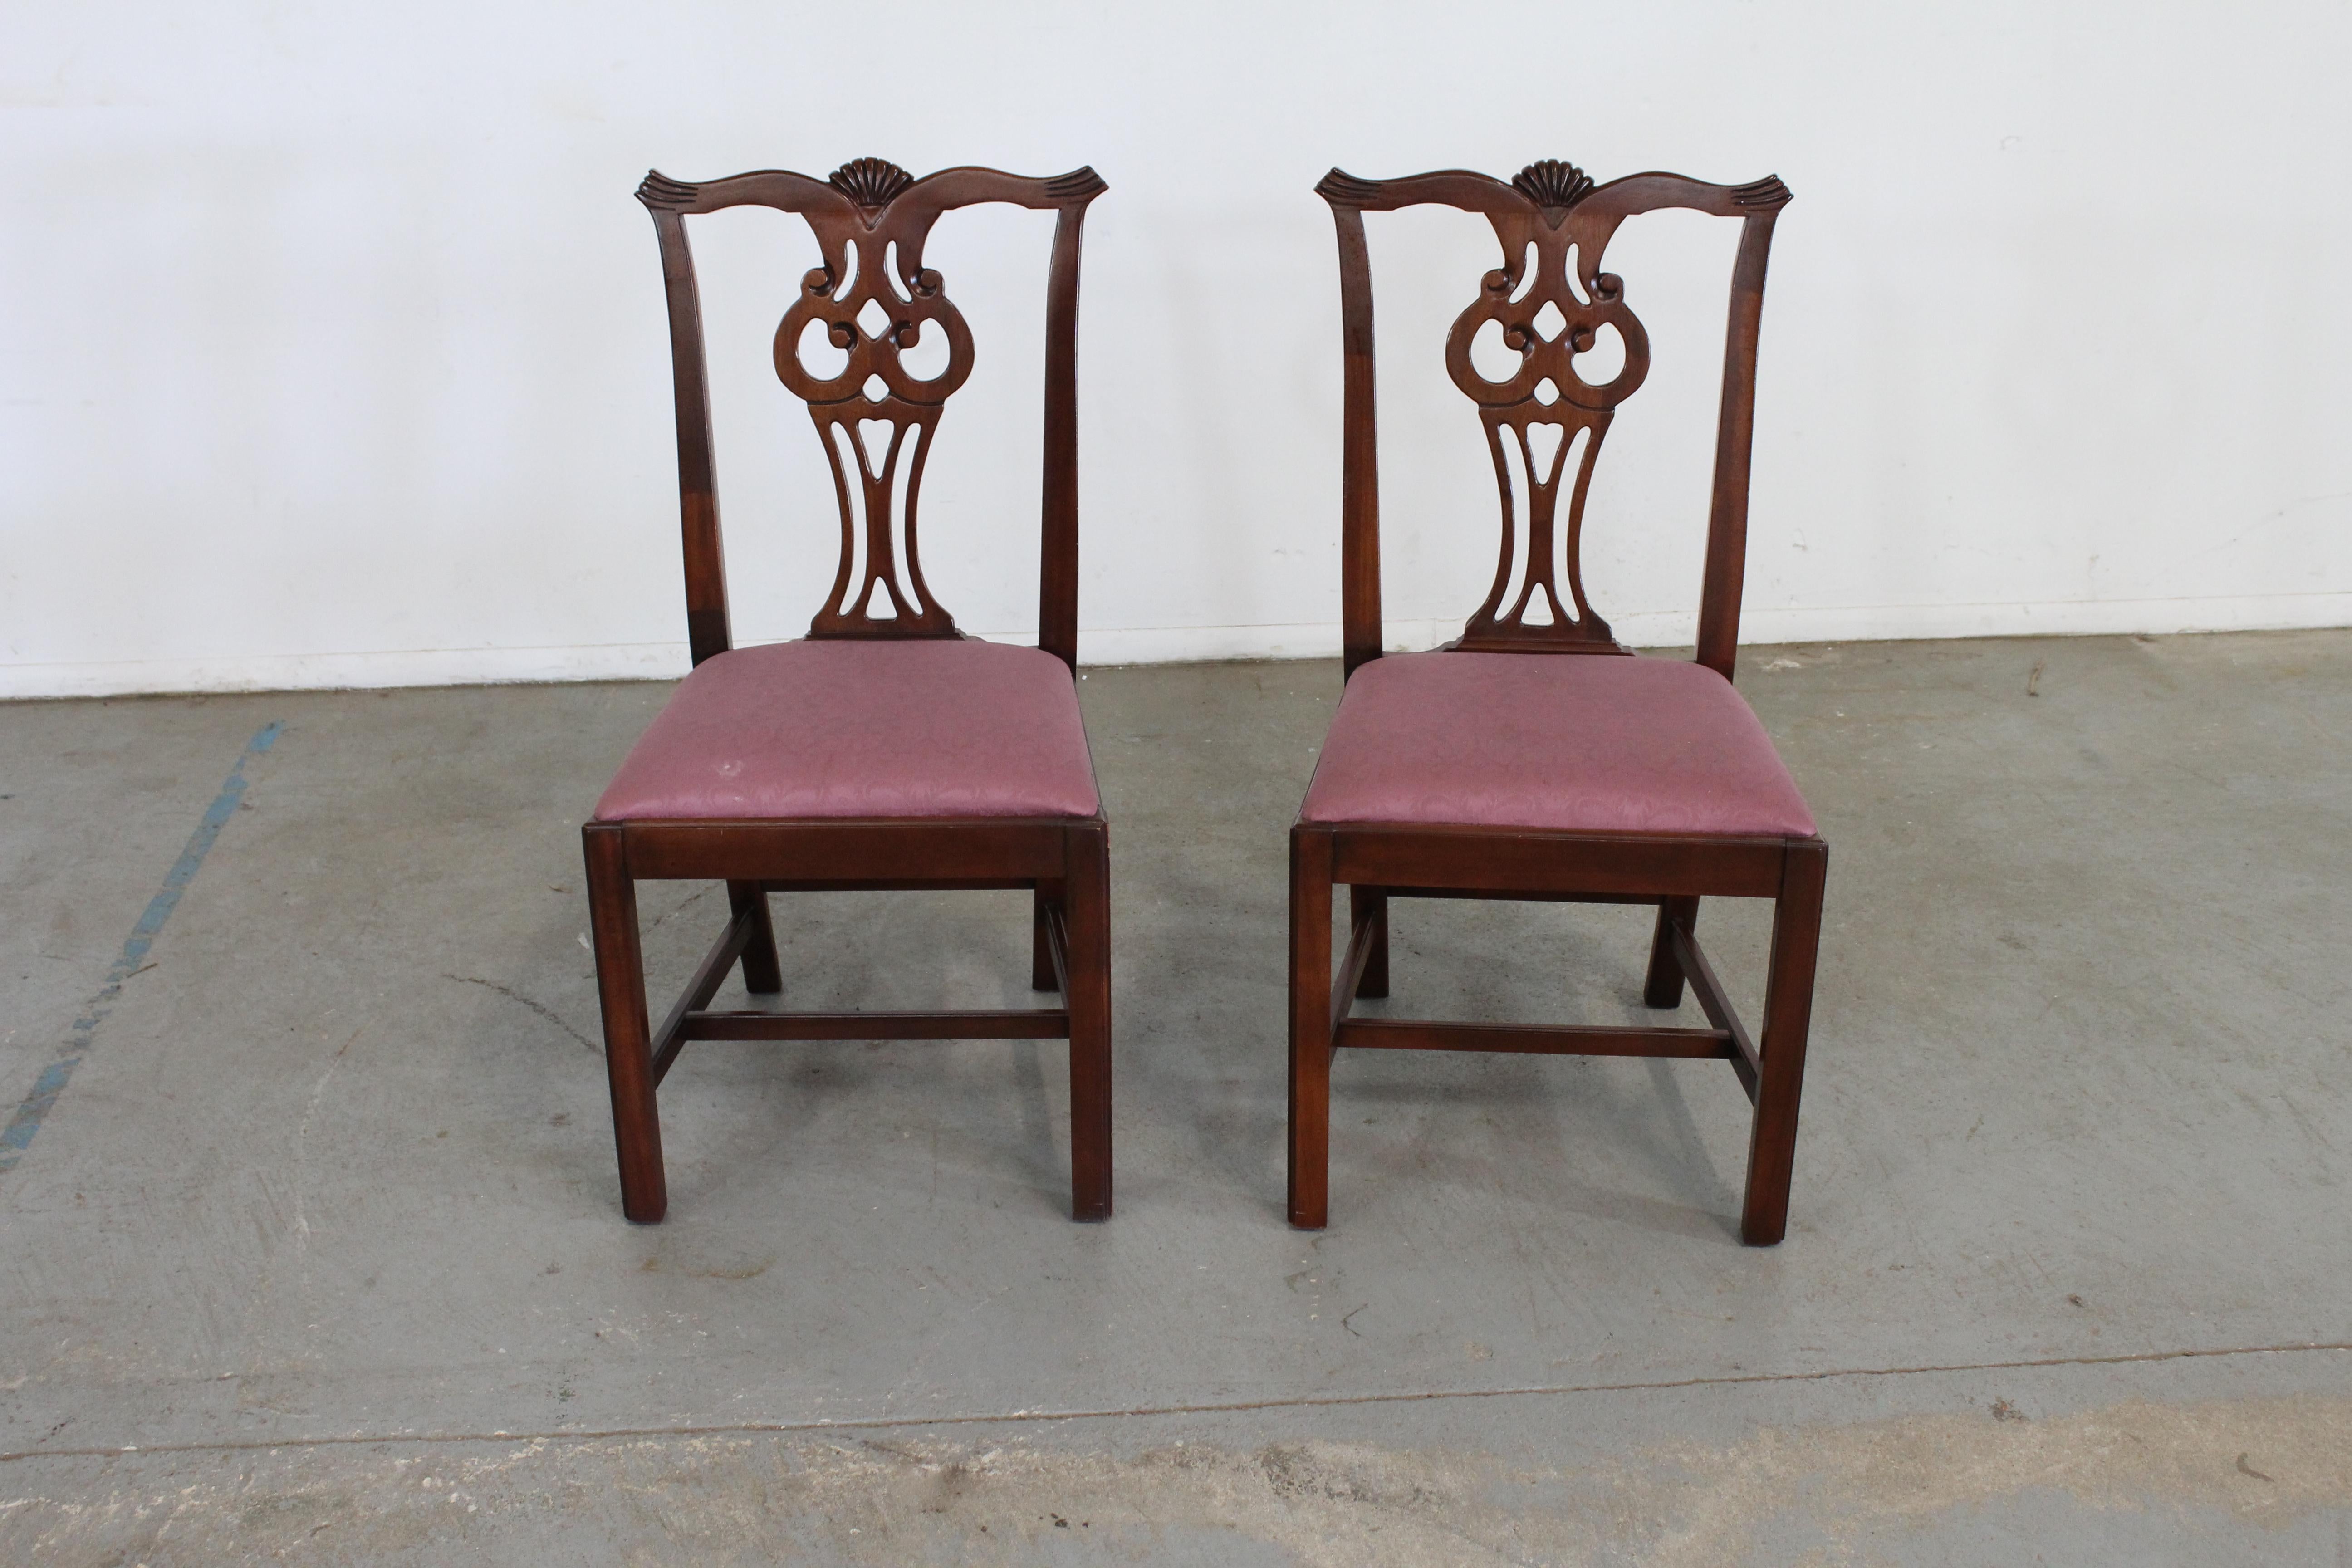 Pair of Chippendale solid mahogany dining side chairs by Century
Offered is a pair of Chippendale solid mahogany dining side chairs by Century. They are made of solid mahogany wood and have upholstered seats. In good condition for their age, with